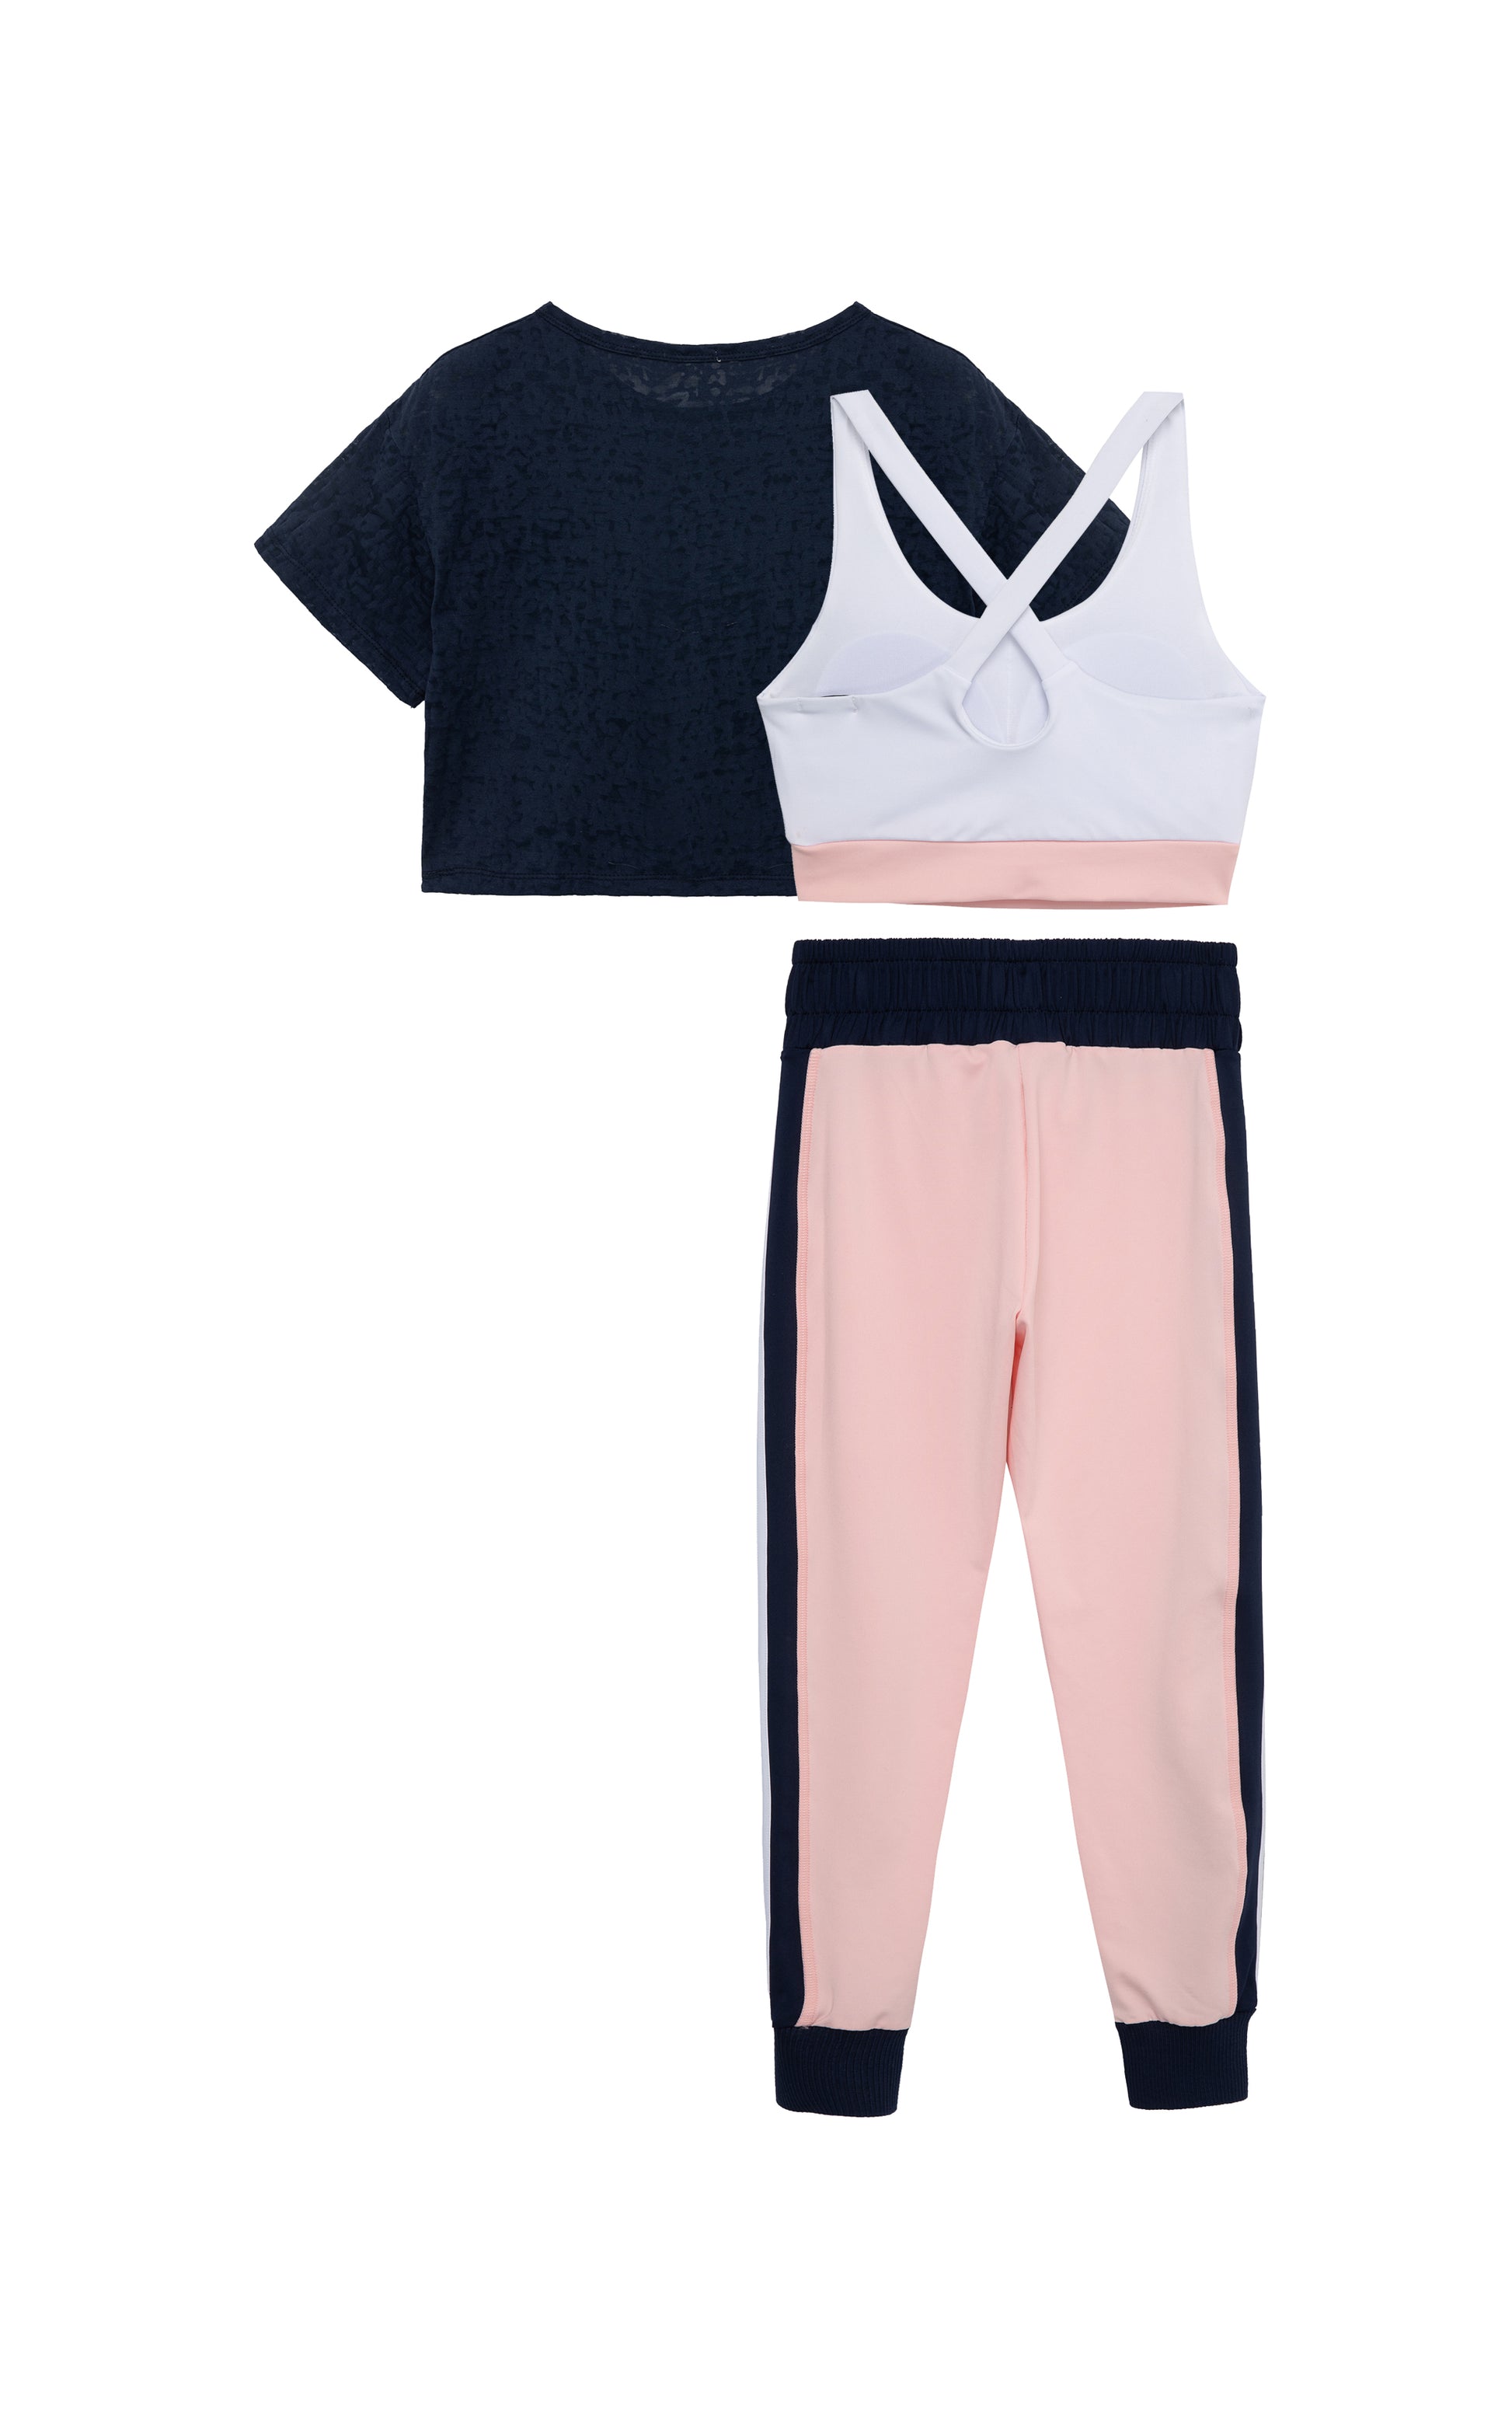 Back of three-piece active set including navy shirt, white tank top with pink bottom trim, and navy-and-pink leggings